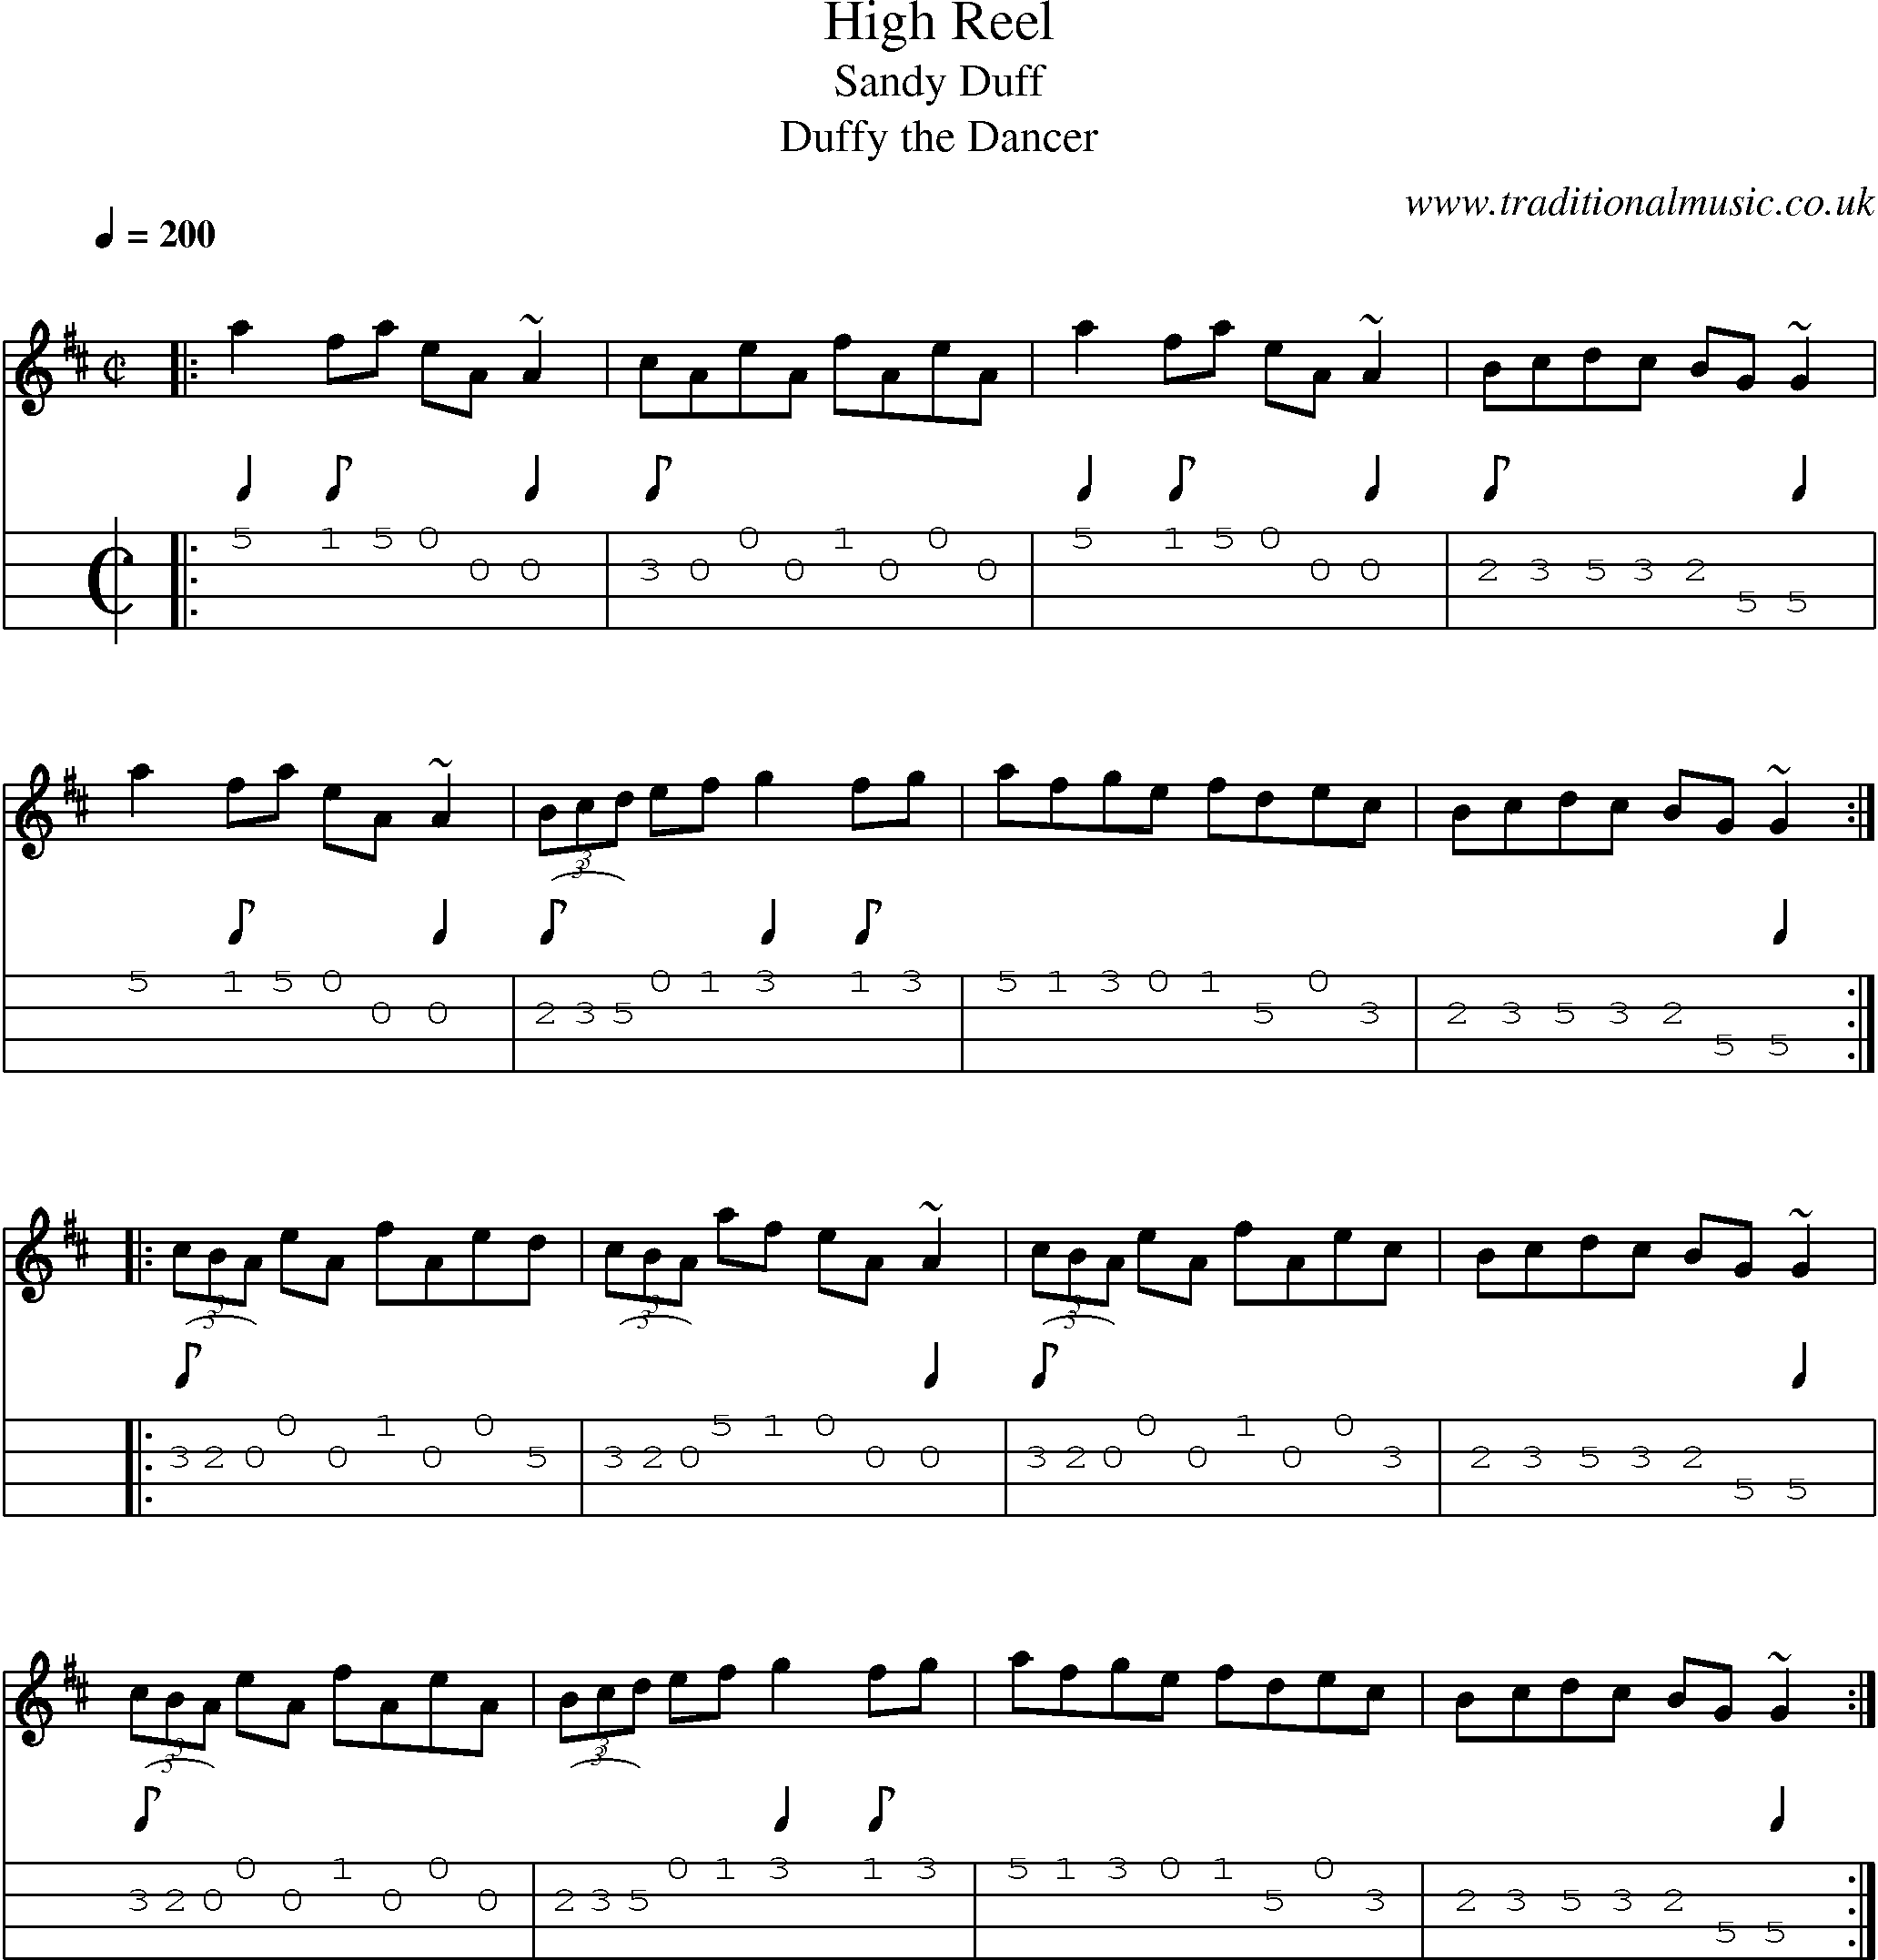 Music Score and Mandolin Tabs for High Reel